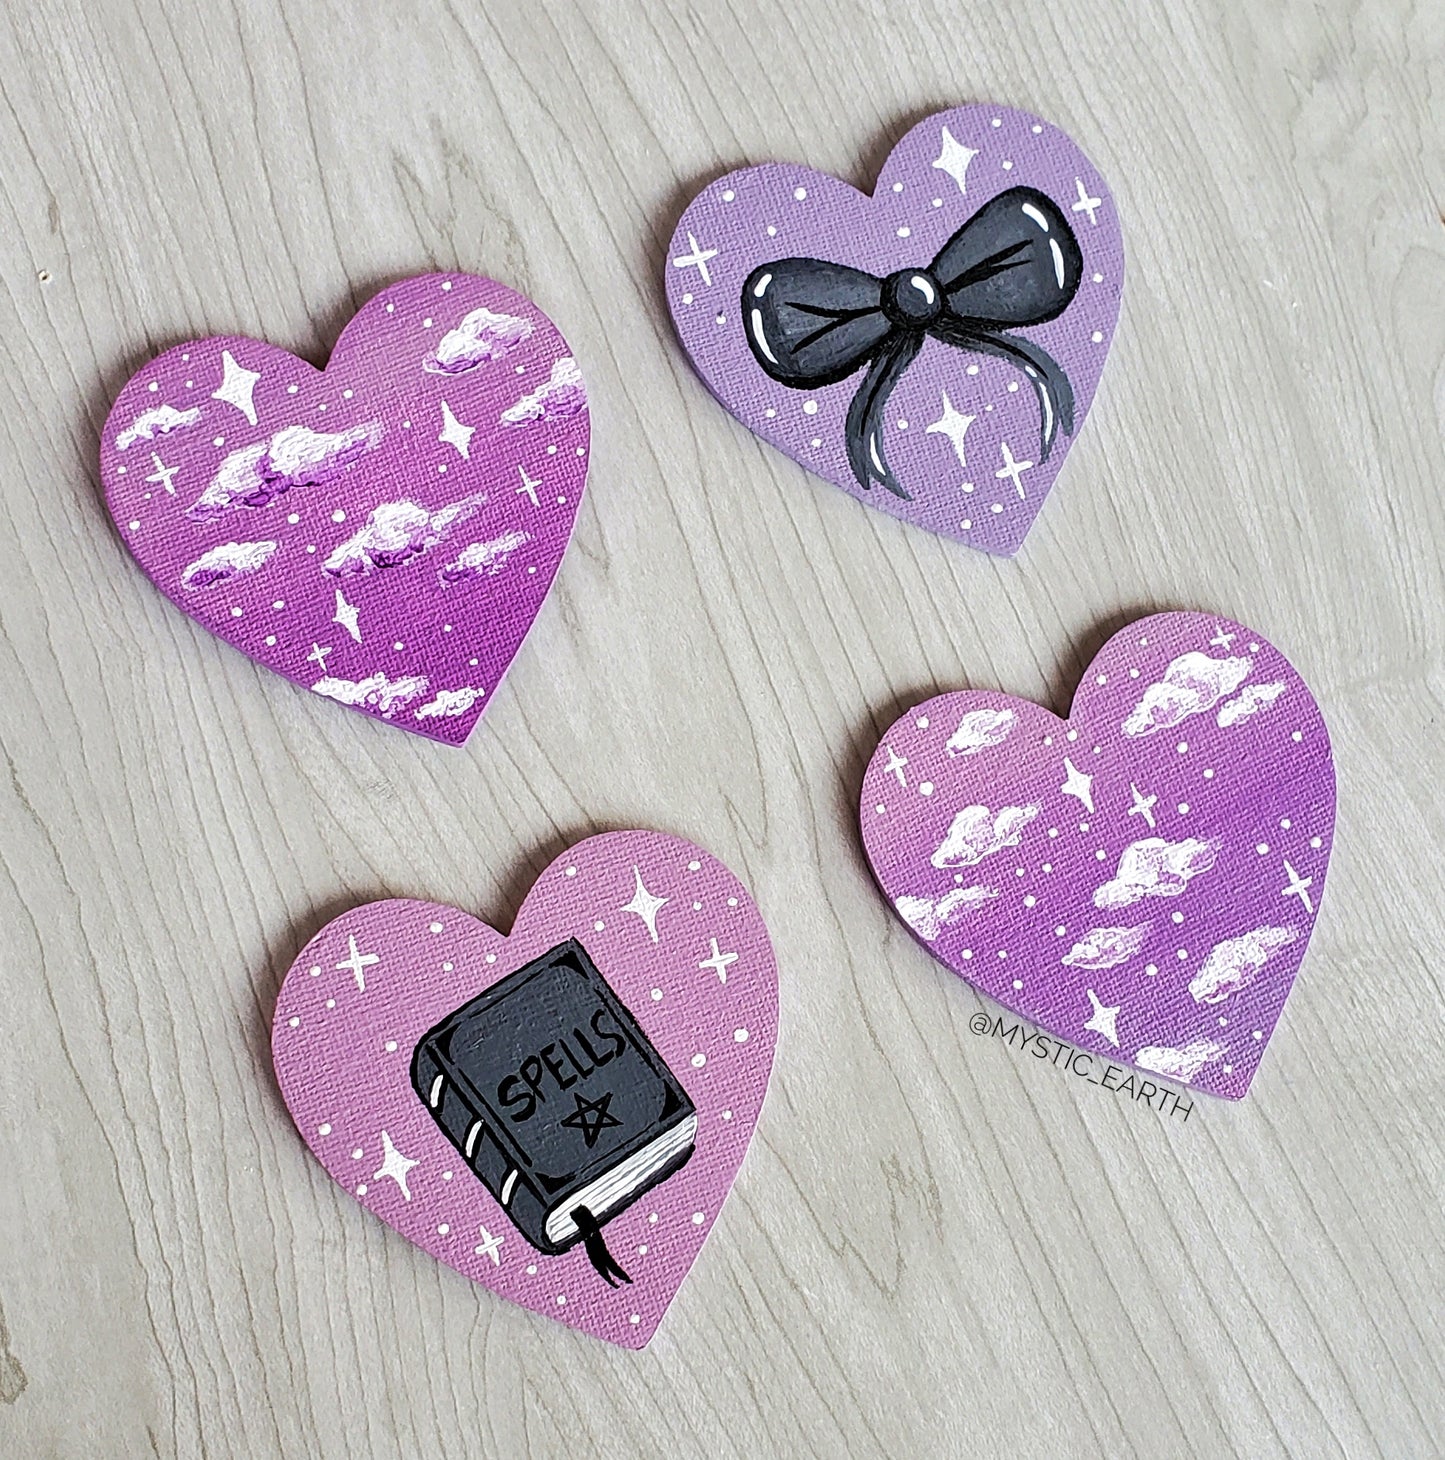 Purple Heart Magnets (Sold Separately)